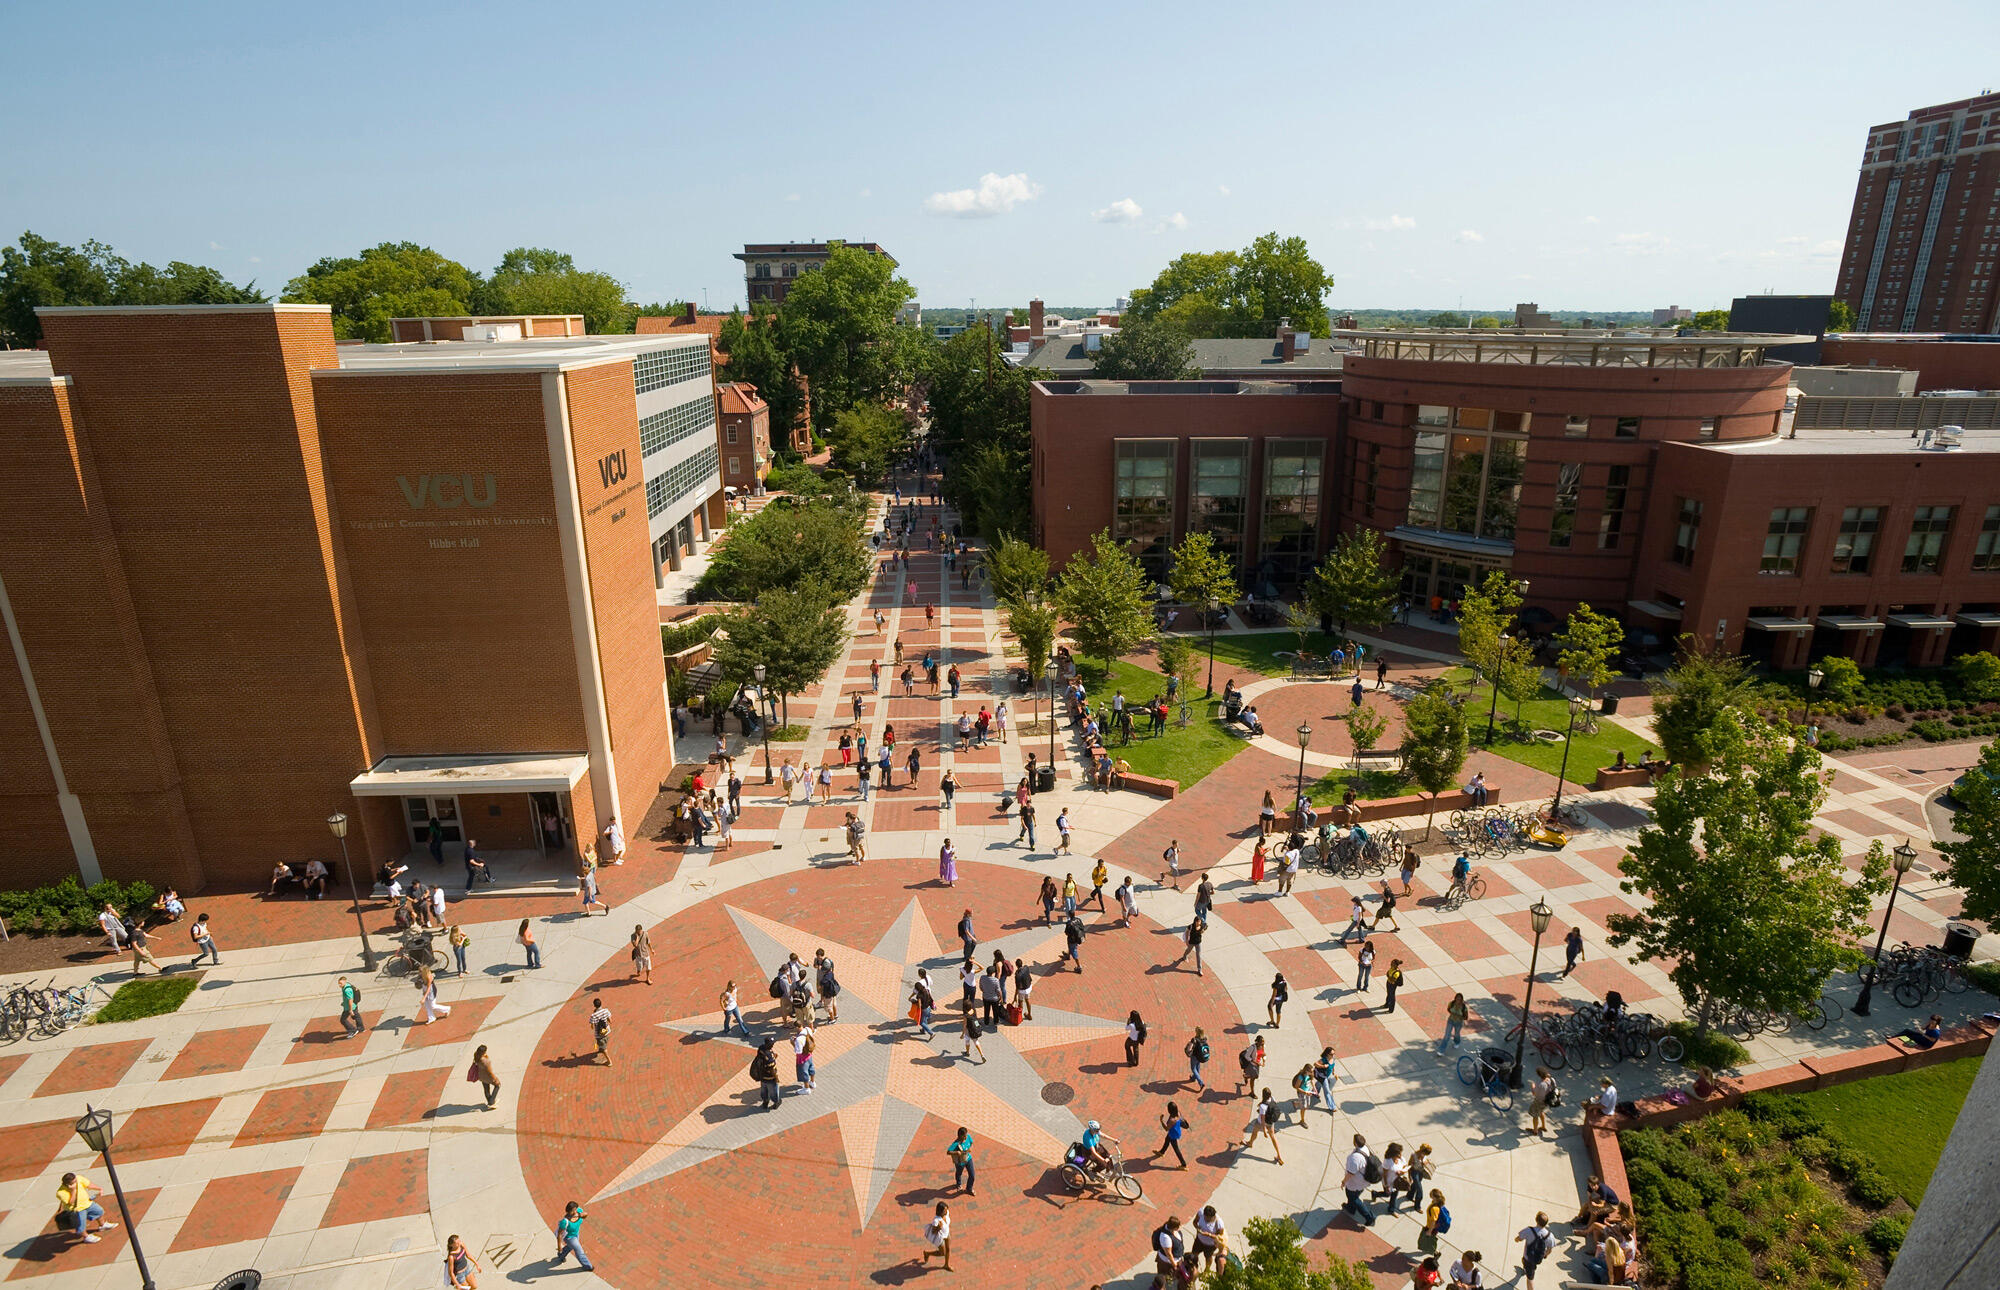 View from above of the VCU Compass area, outdoor area with people passing through it.